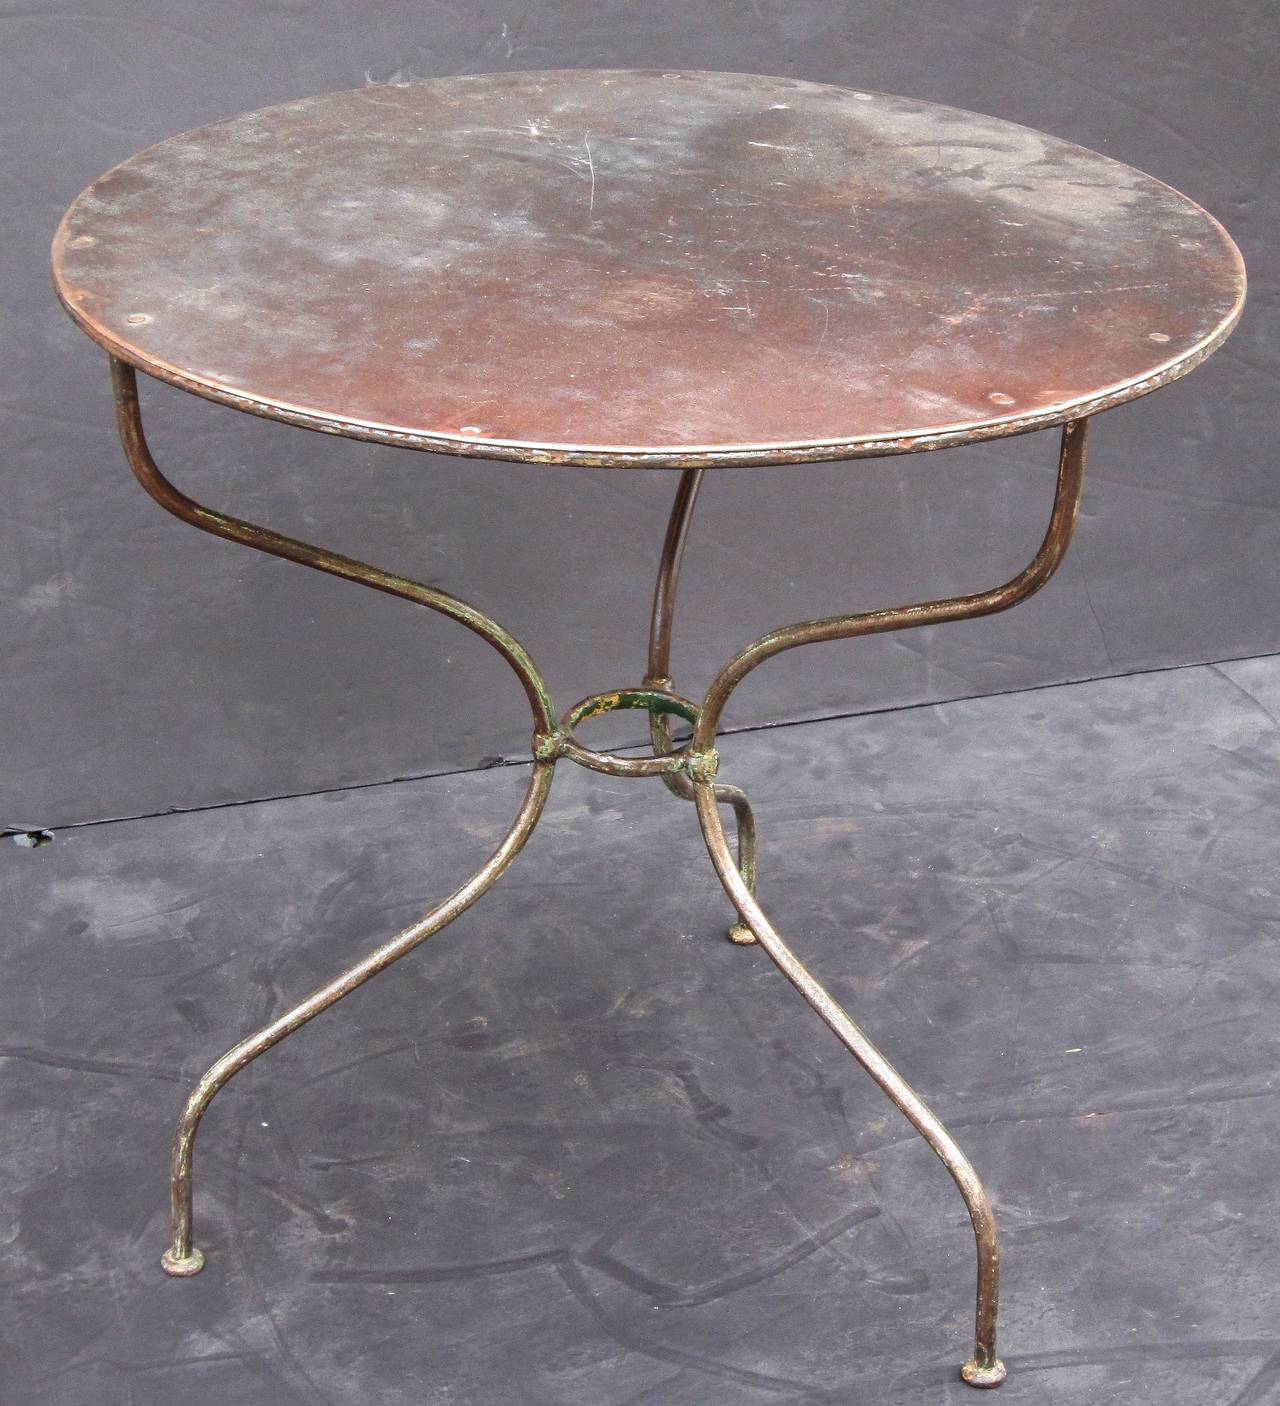 zinc top round table